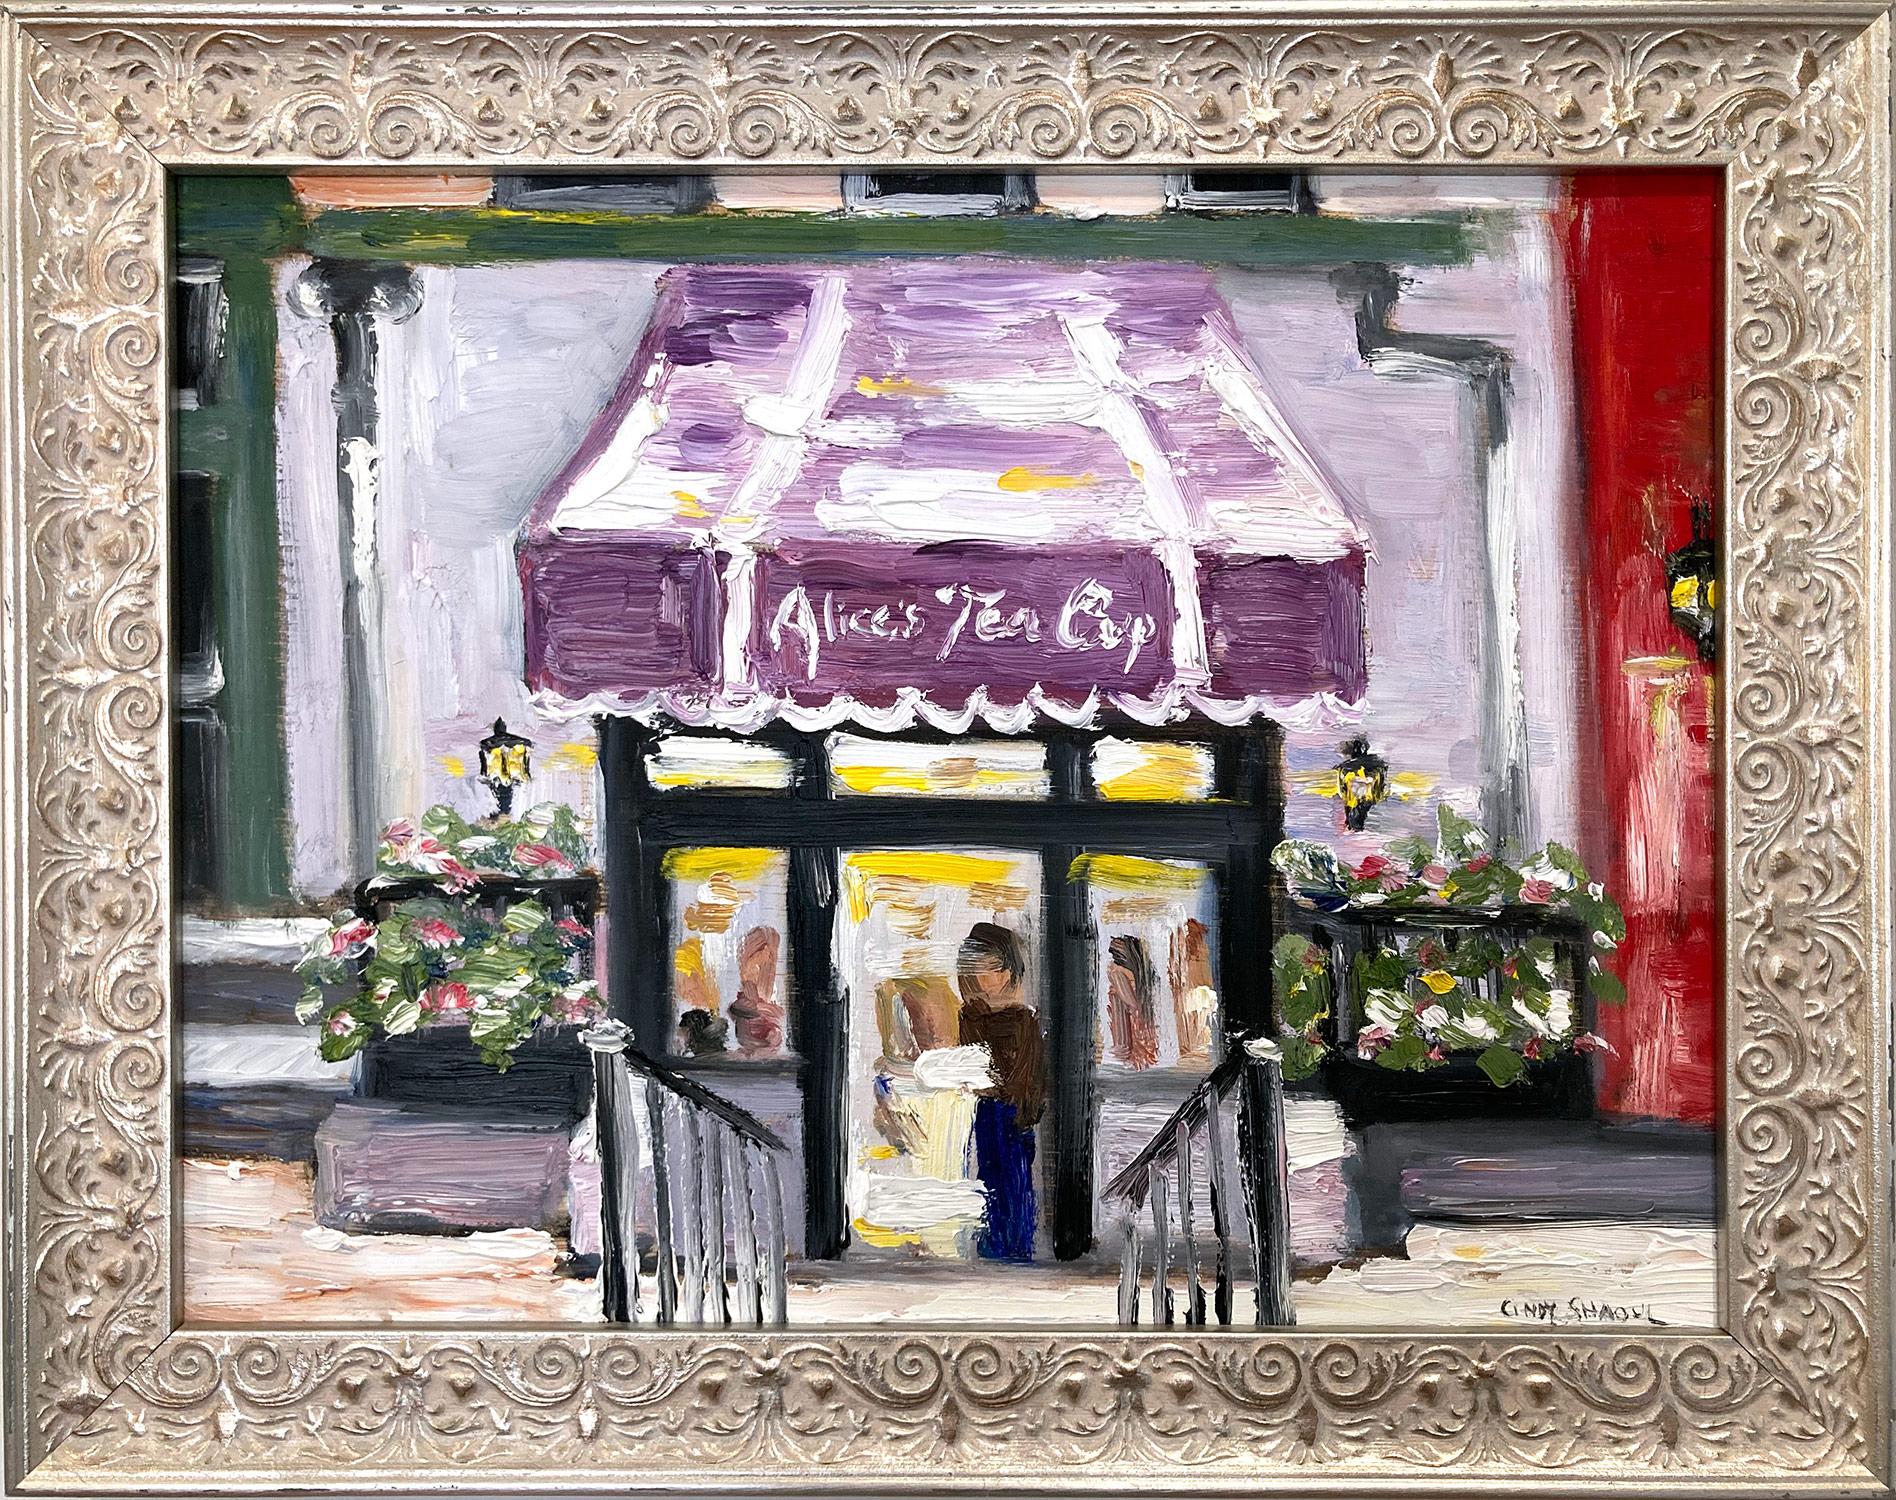 Cindy Shaoul Figurative Painting - "Alices Tea Cup" Colorful Impressionistic Plein Air Oil Painting New York City 